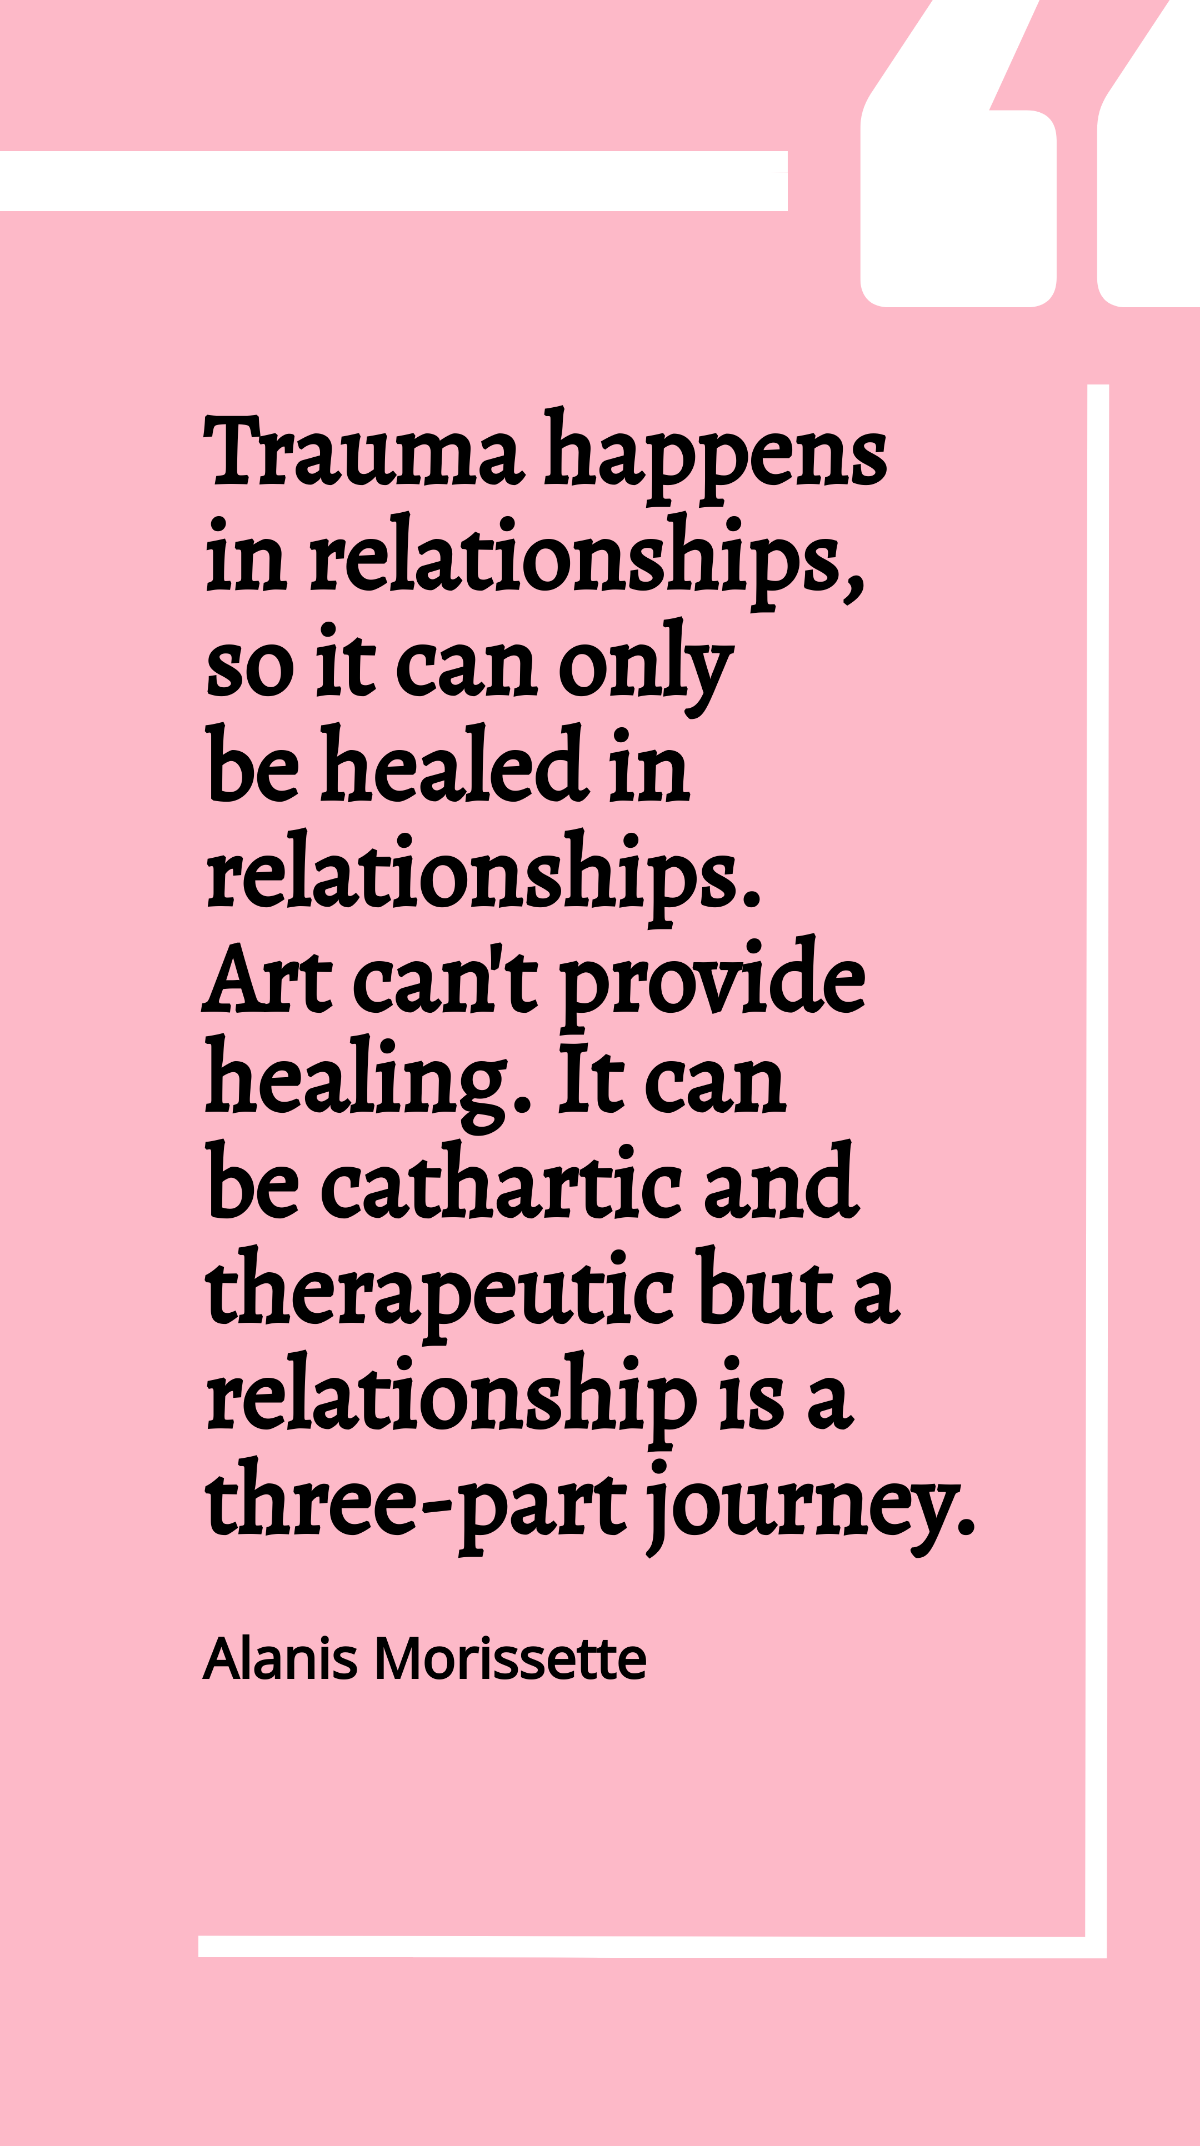 Alanis Morissette - Trauma happens in relationships, so it can only be healed in relationships. Art can't provide healing. It can be cathartic and therapeutic but a relationship is a three-part journe